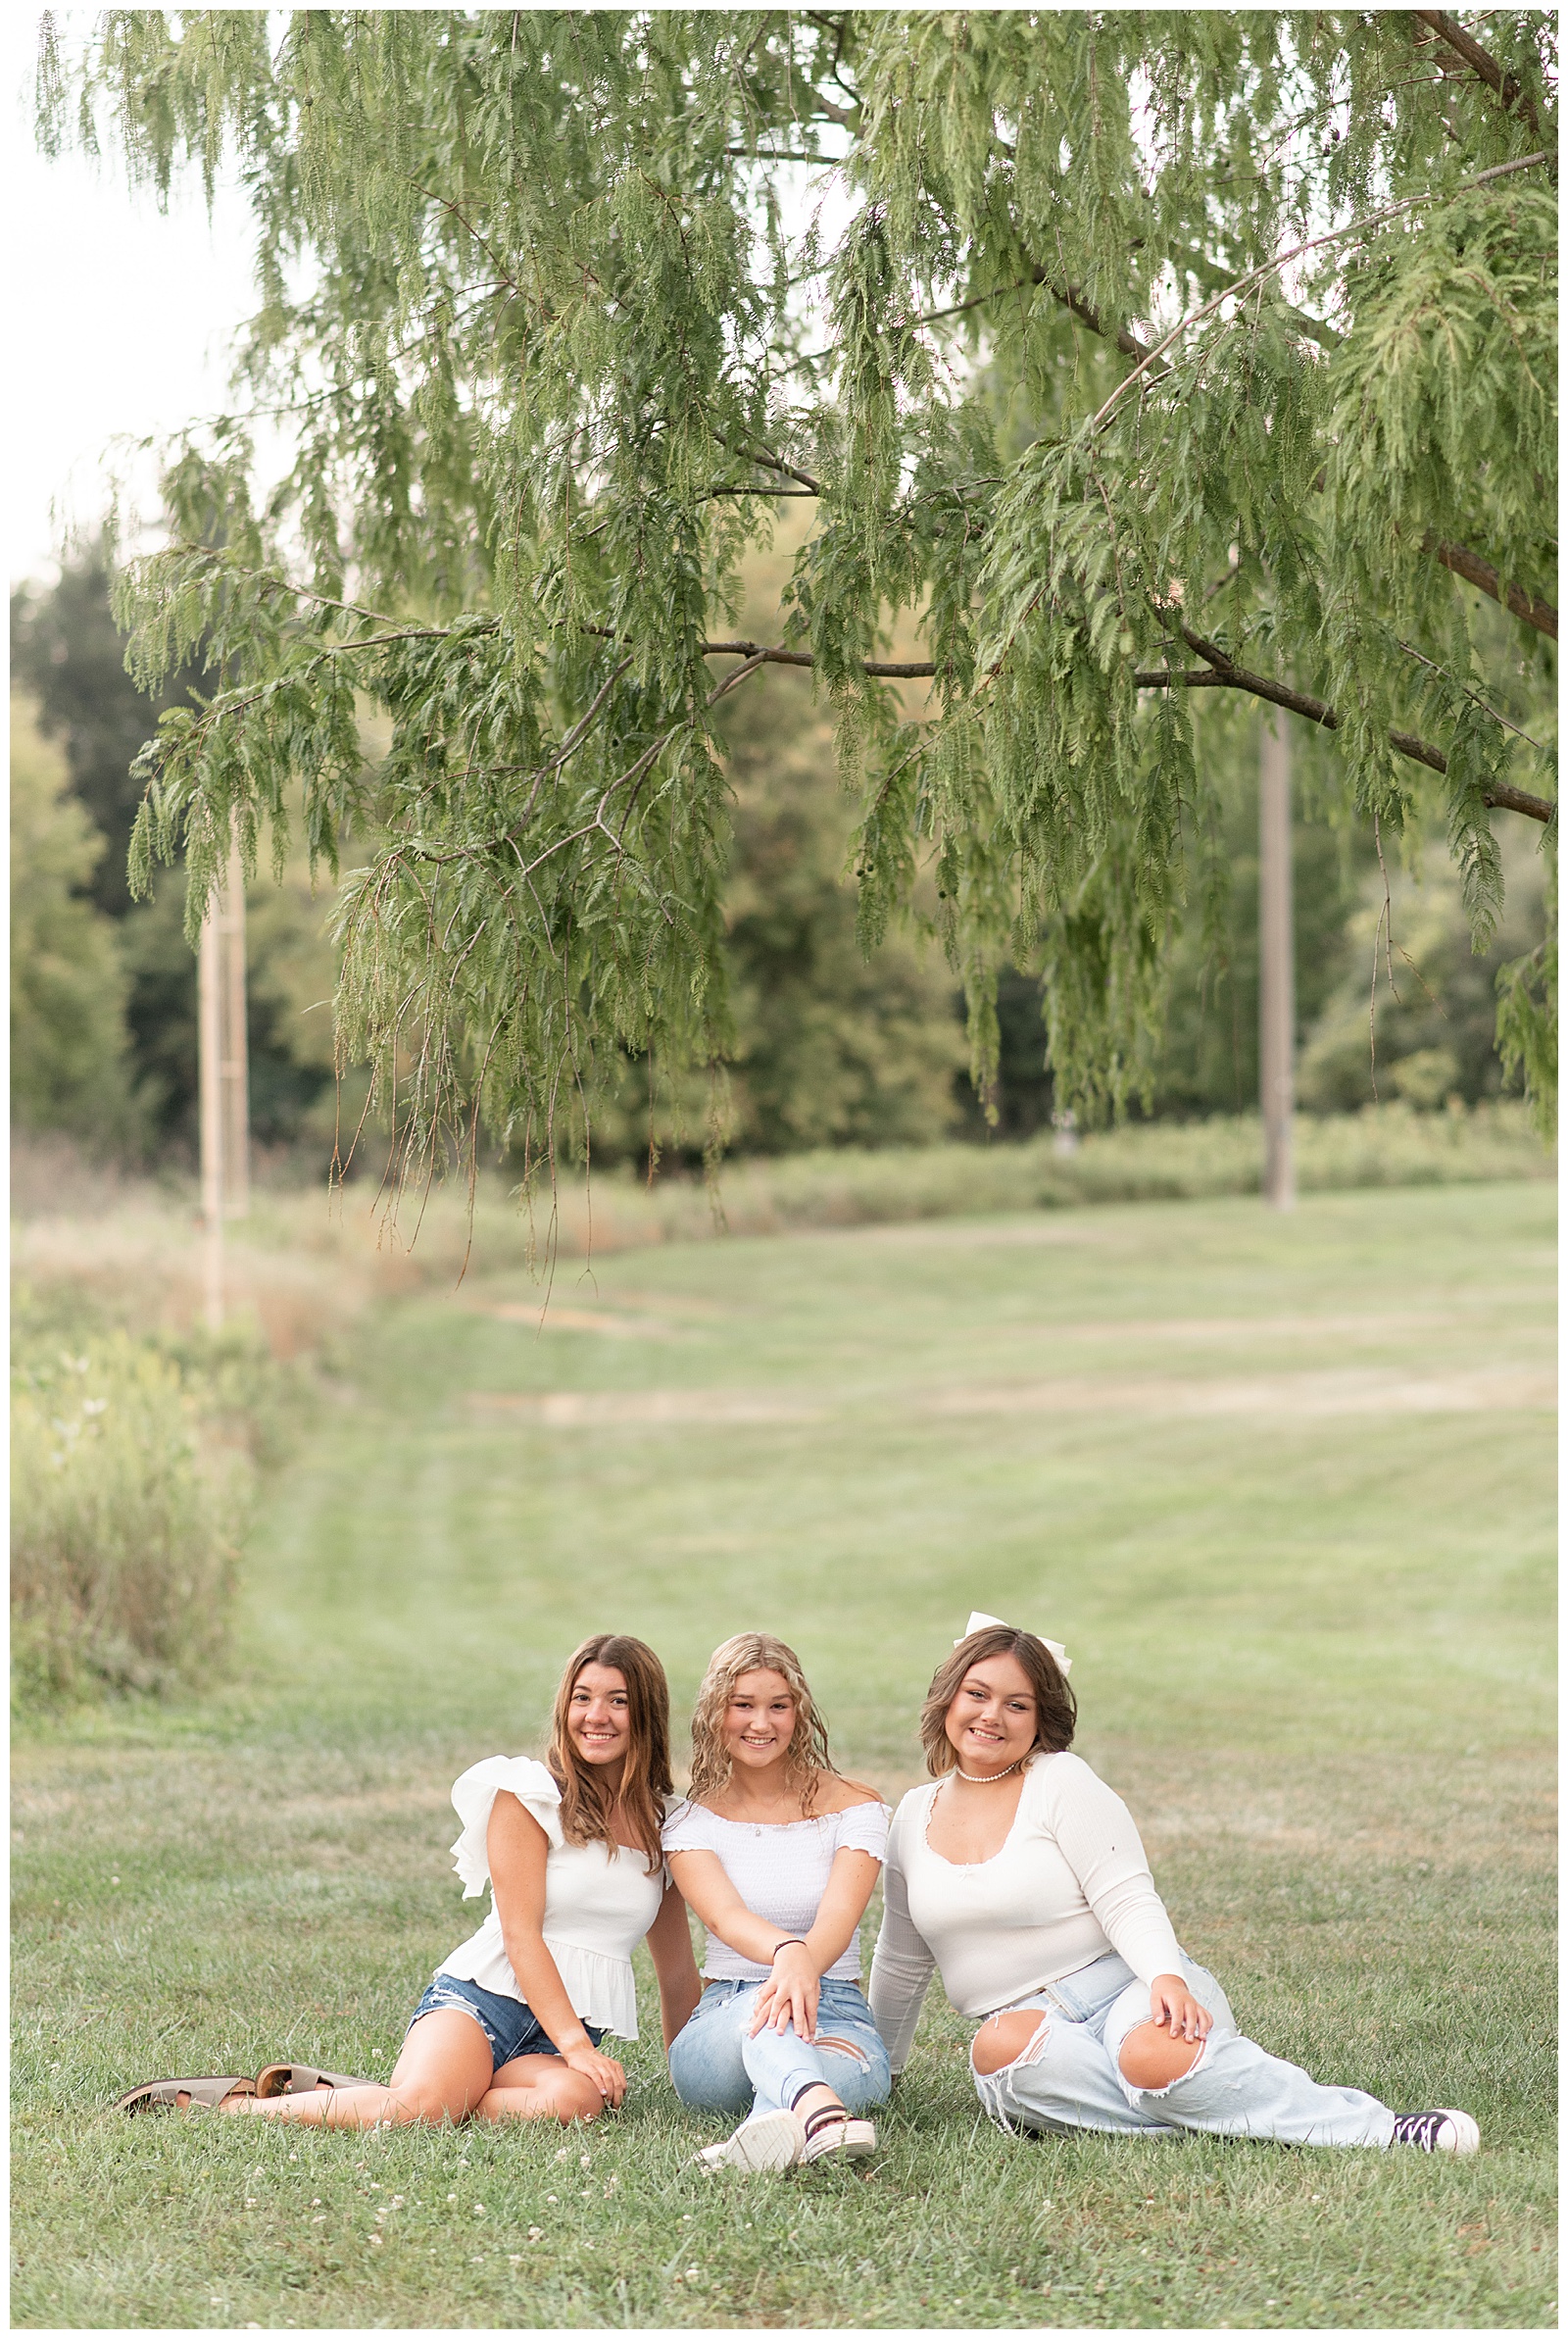 three senior spokesmodel girls in white tops and blue jeans sitting in grass with trees behind them at park in lancaster pennsylvania